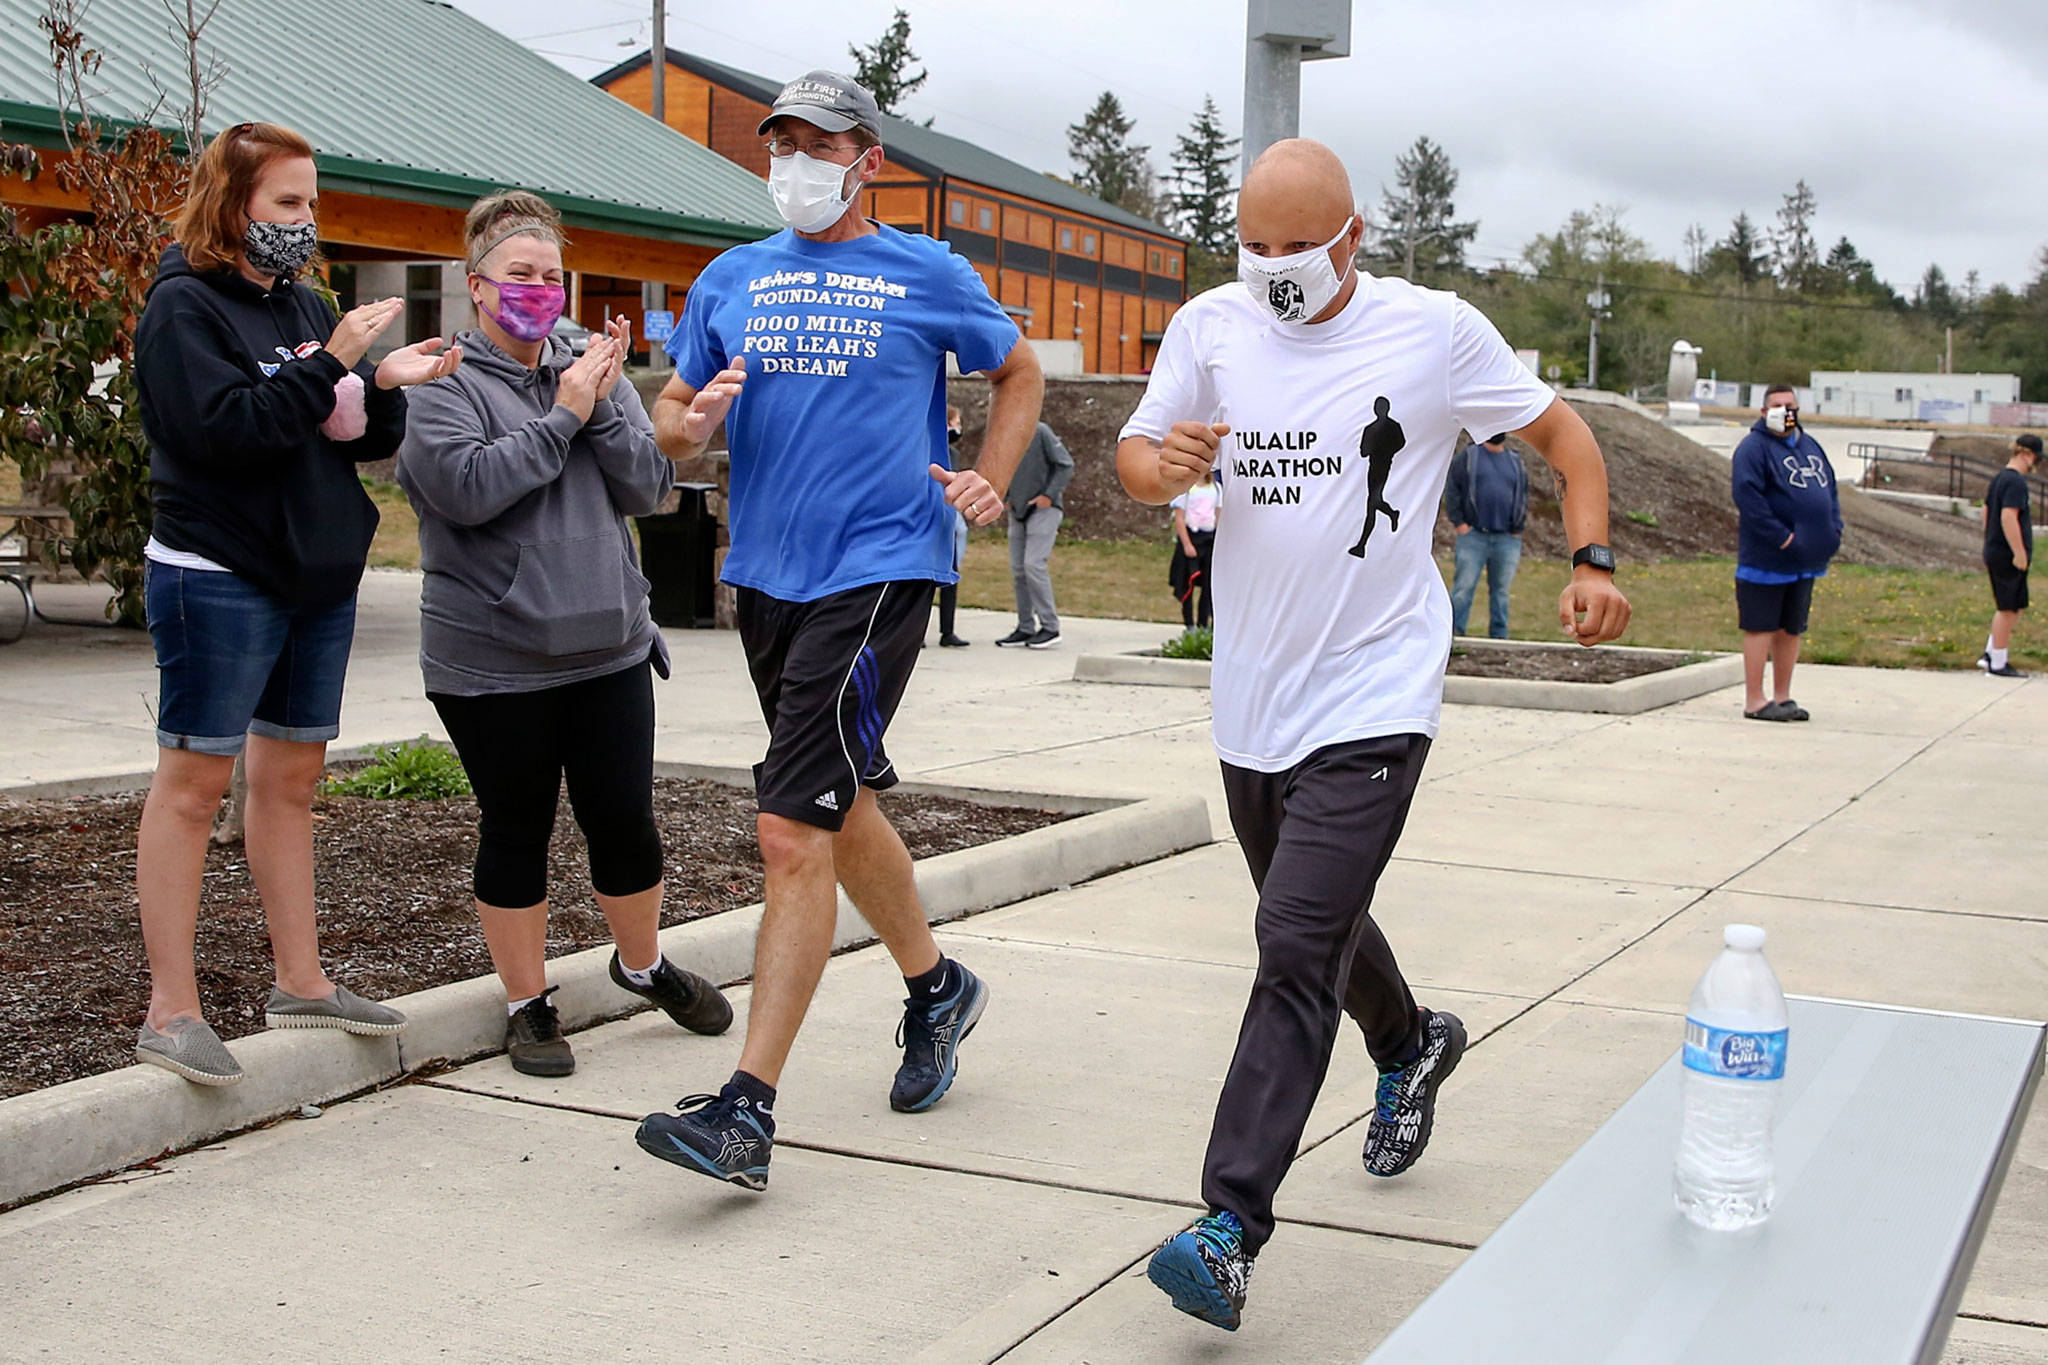 Jim Strickland (left) runs with Tyler Fryberg for the final mile in a 1,000-mile challenge to raise money for Leah’s Dream Foundation. (Kevin Clark / The Herald)